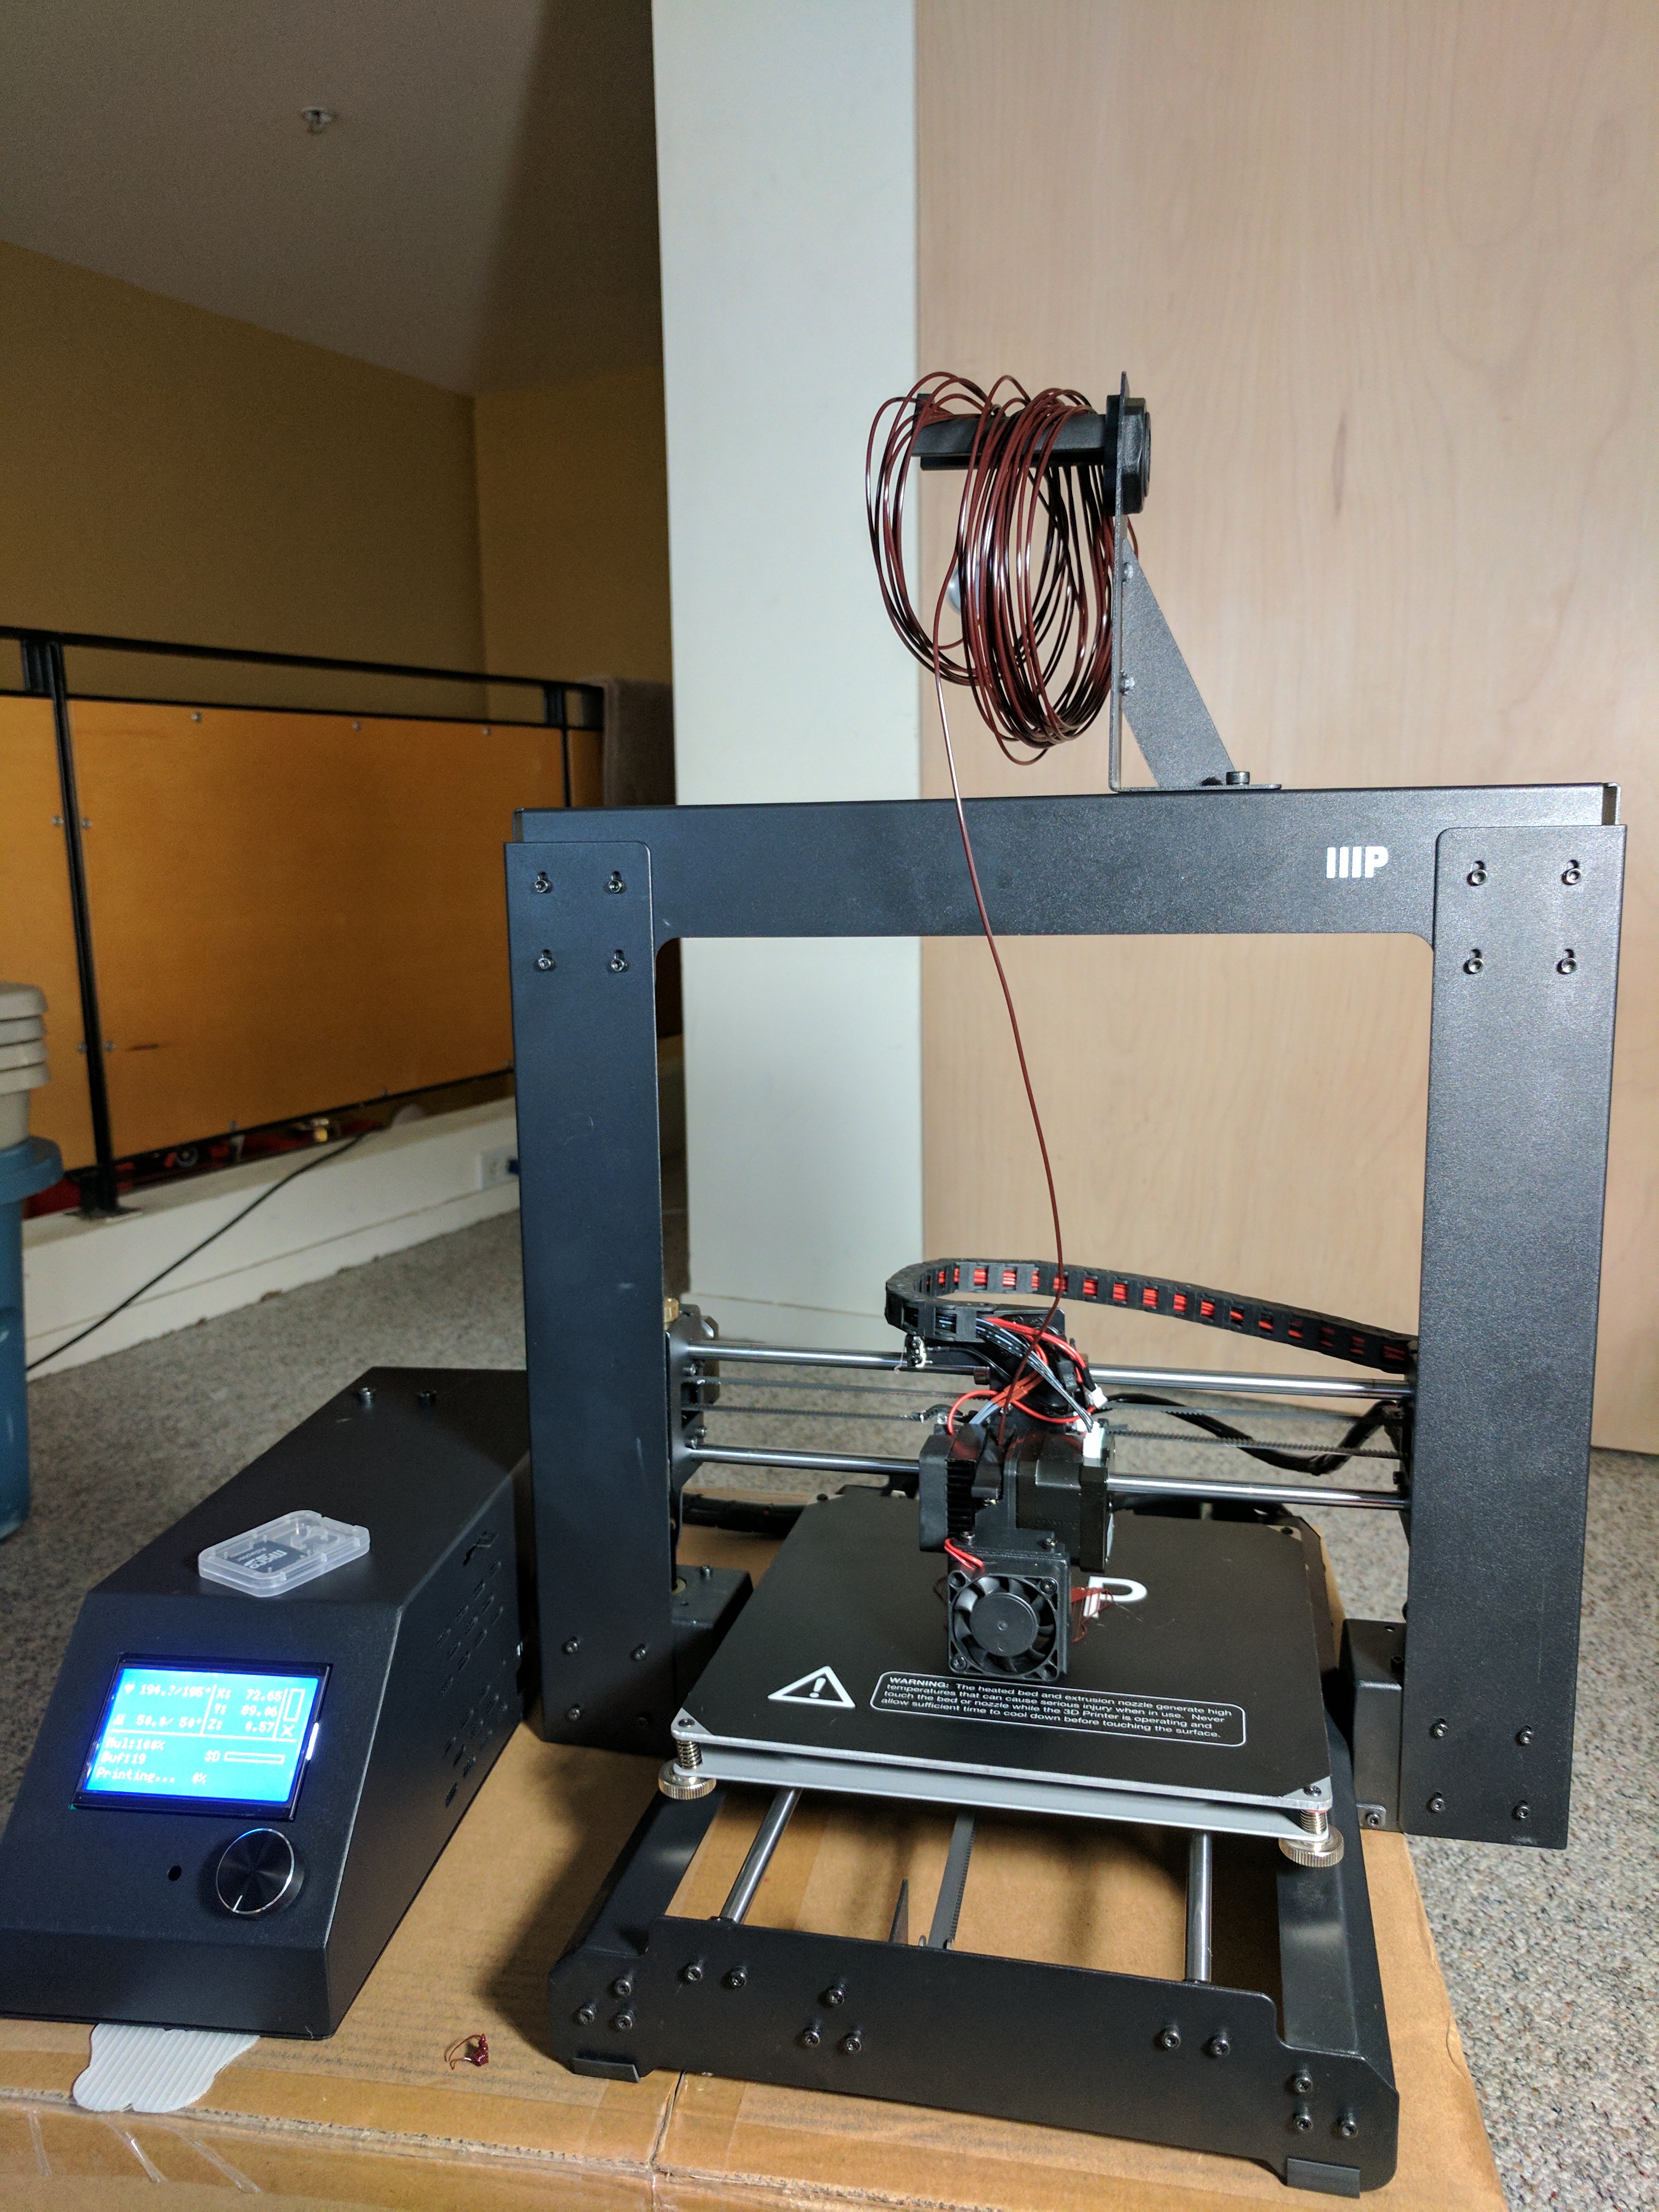 This is my Monoprice Maker Select v2 after assembly and printing its first job. Note: A carboard box is a terribly BAD platform for 3D Printing.